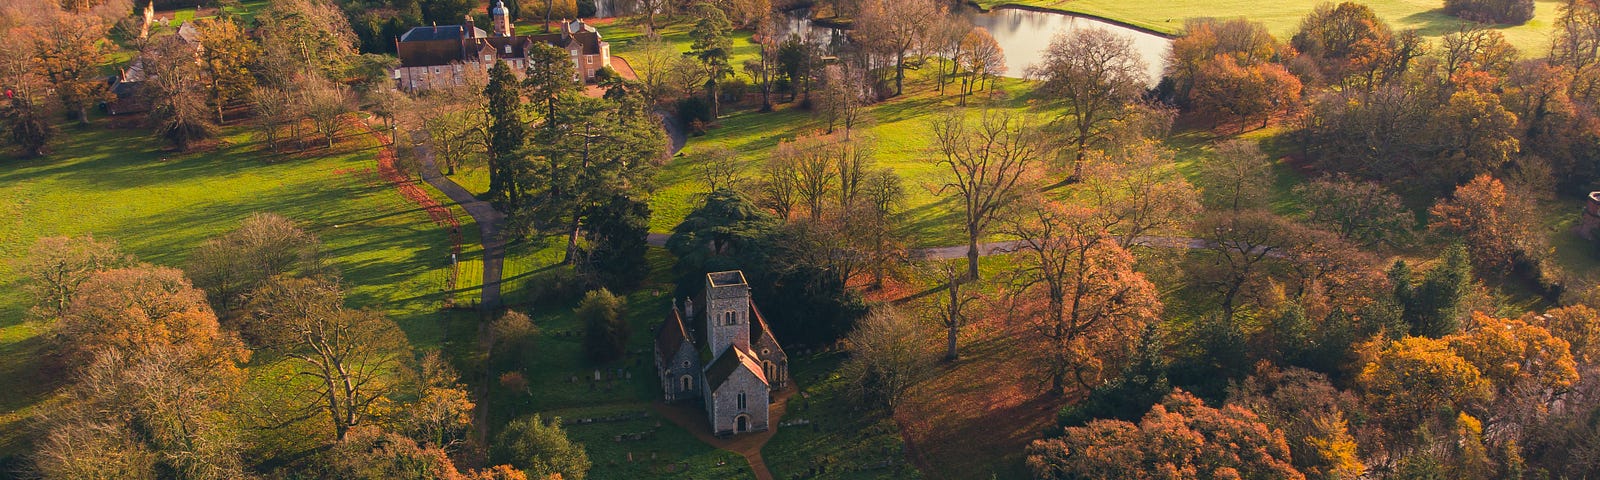 Aerial view of an English countryside with green grass, river, trees with autumn leaves, a road with two white vehivles and featuring St Mary’s Church, Gillingham, Norfolk